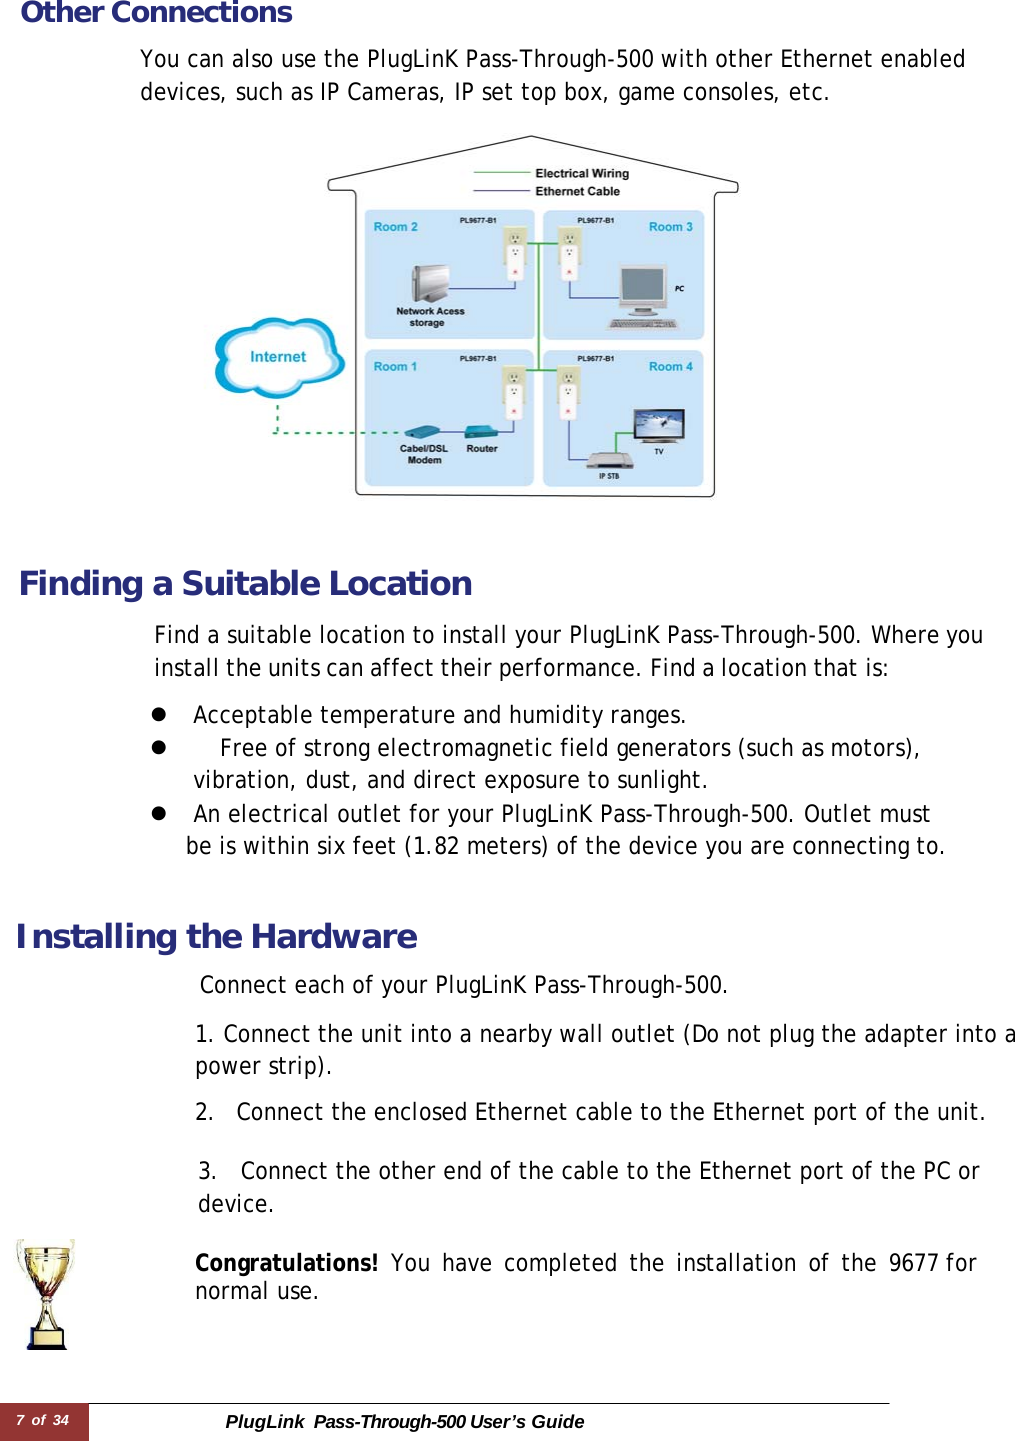 7 of 34 PlugLink  Pass-Through-500 User’s Guide   Other Connections  You can also use the PlugLinK Pass-Through-500 with other Ethernet enabled devices, such as IP Cameras, IP set top box, game consoles, etc.    Finding a Suitable Location  Find a suitable location to install your PlugLinK Pass-Through-500. Where you install the units can affect their performance. Find a location that is:  z  Acceptable temperature and humidity ranges. z    Free of strong electromagnetic field generators (such as motors), vibration, dust, and direct exposure to sunlight. z  An electrical outlet for your PlugLinK Pass-Through-500. Outlet must be is within six feet (1.82 meters) of the device you are connecting to.    Installing the Hardware  Connect each of your PlugLinK Pass-Through-500.  1. Connect the unit into a nearby wall outlet (Do not plug the adapter into a power strip).  2.  Connect the enclosed Ethernet cable to the Ethernet port of the unit.   3.  Connect the other end of the cable to the Ethernet port of the PC or device.  Congratulations! You have completed the installation of the 9677 for normal use. 